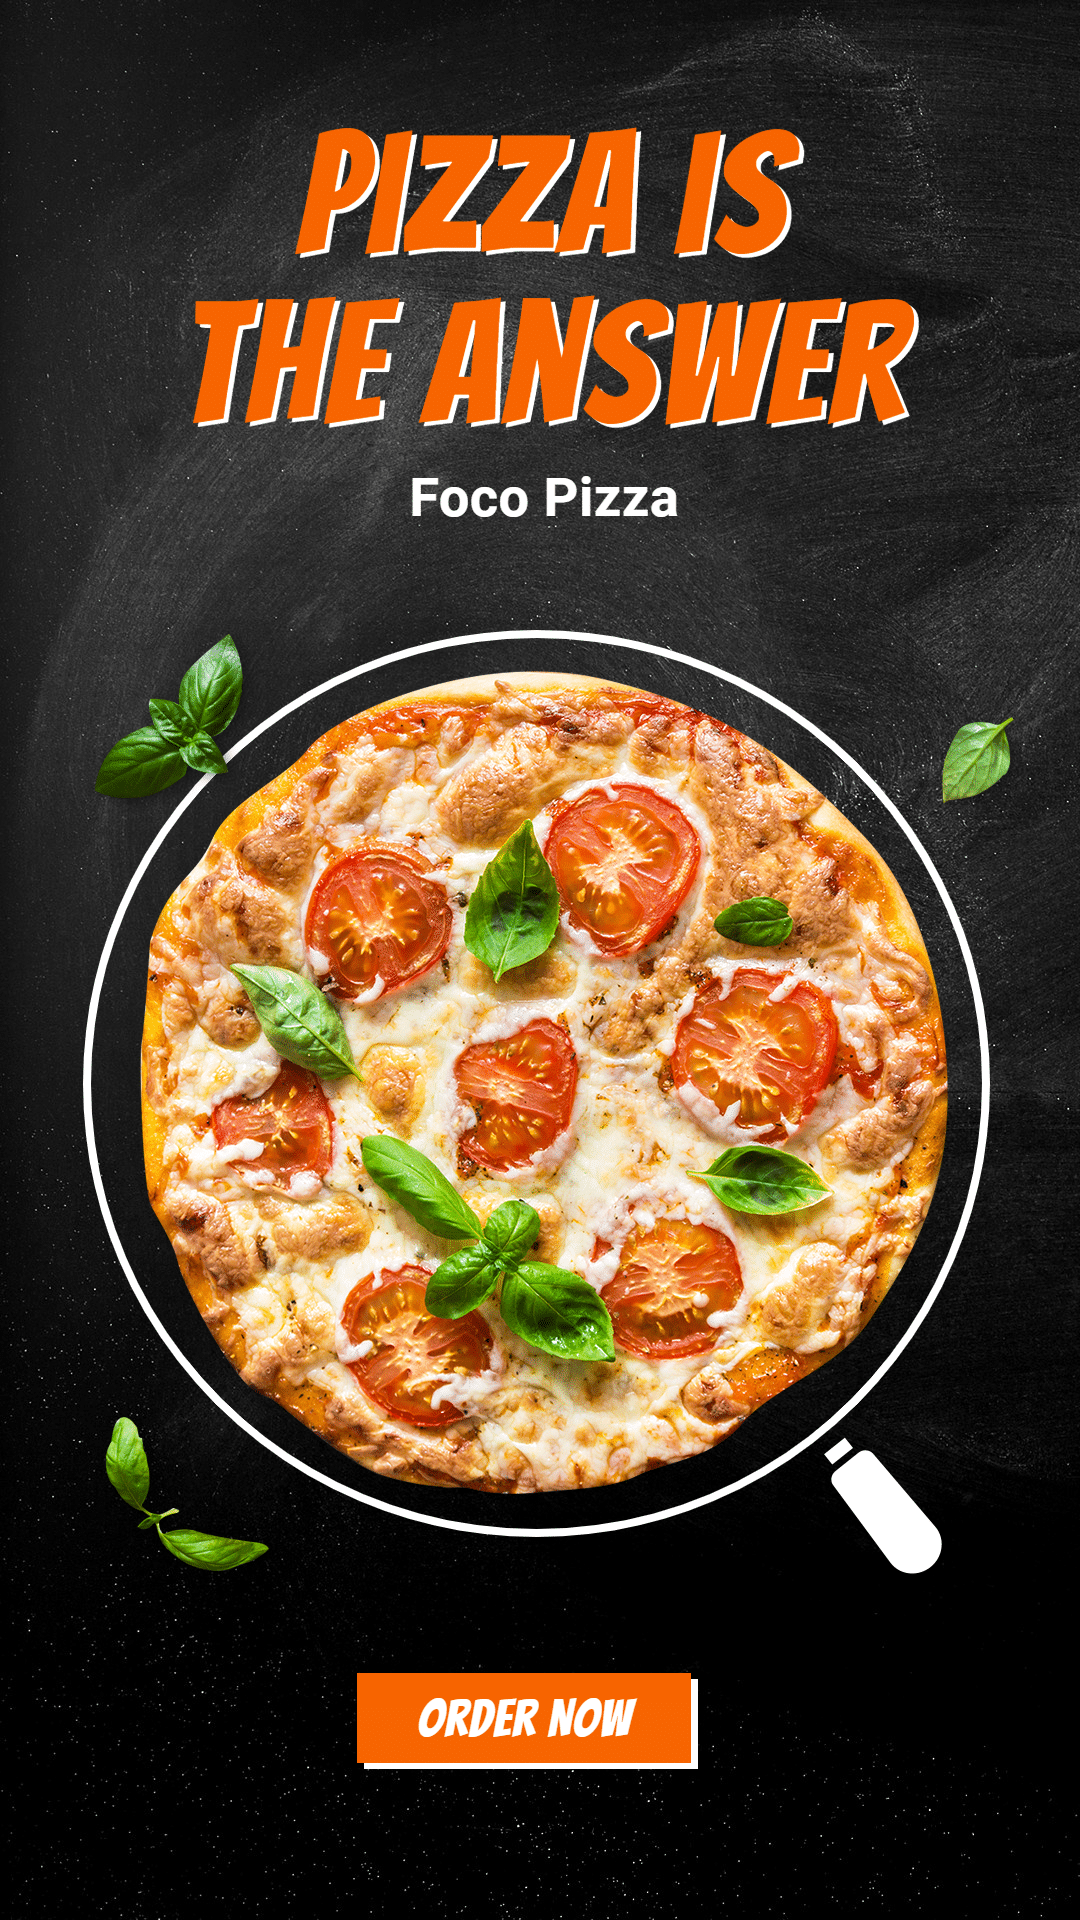 Green Leaf Surround Creative Pizza Promotion Ecommerce Story预览效果